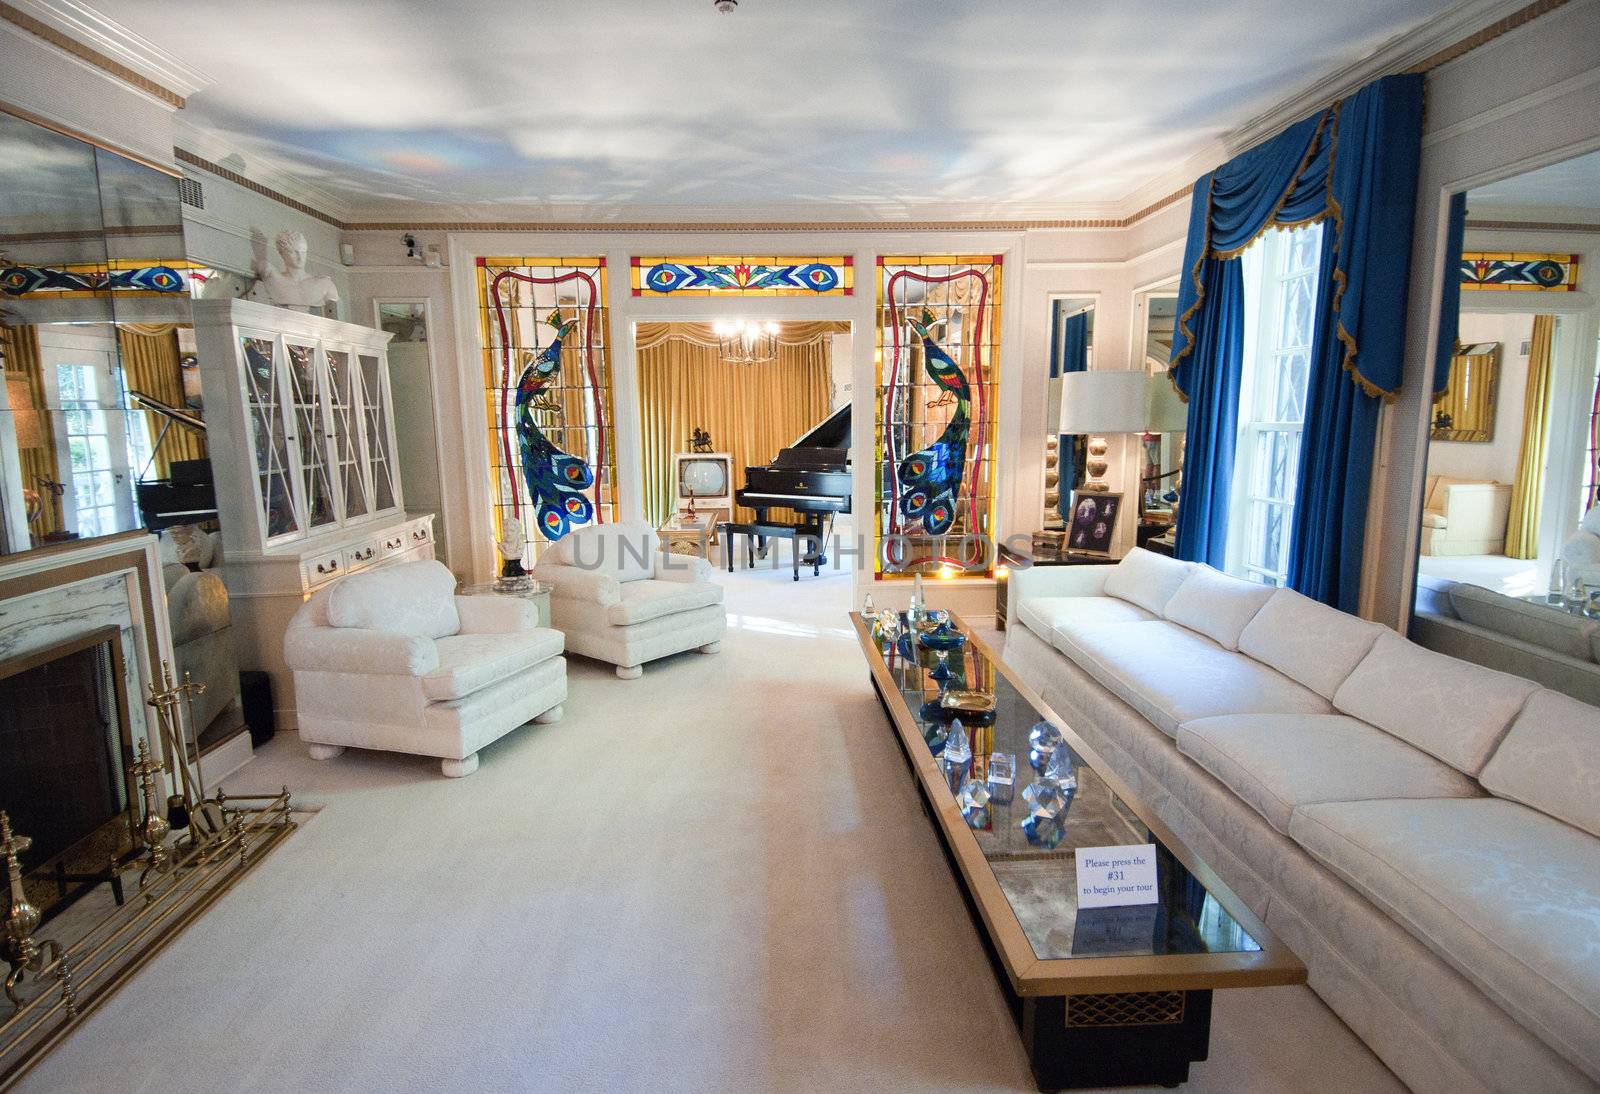 Inside Elvis Presley's Graceland, September 30th 2010. It has become the second most-visited private home in America with over 600,000 visitors a year. Only the White House has more visitors per year.